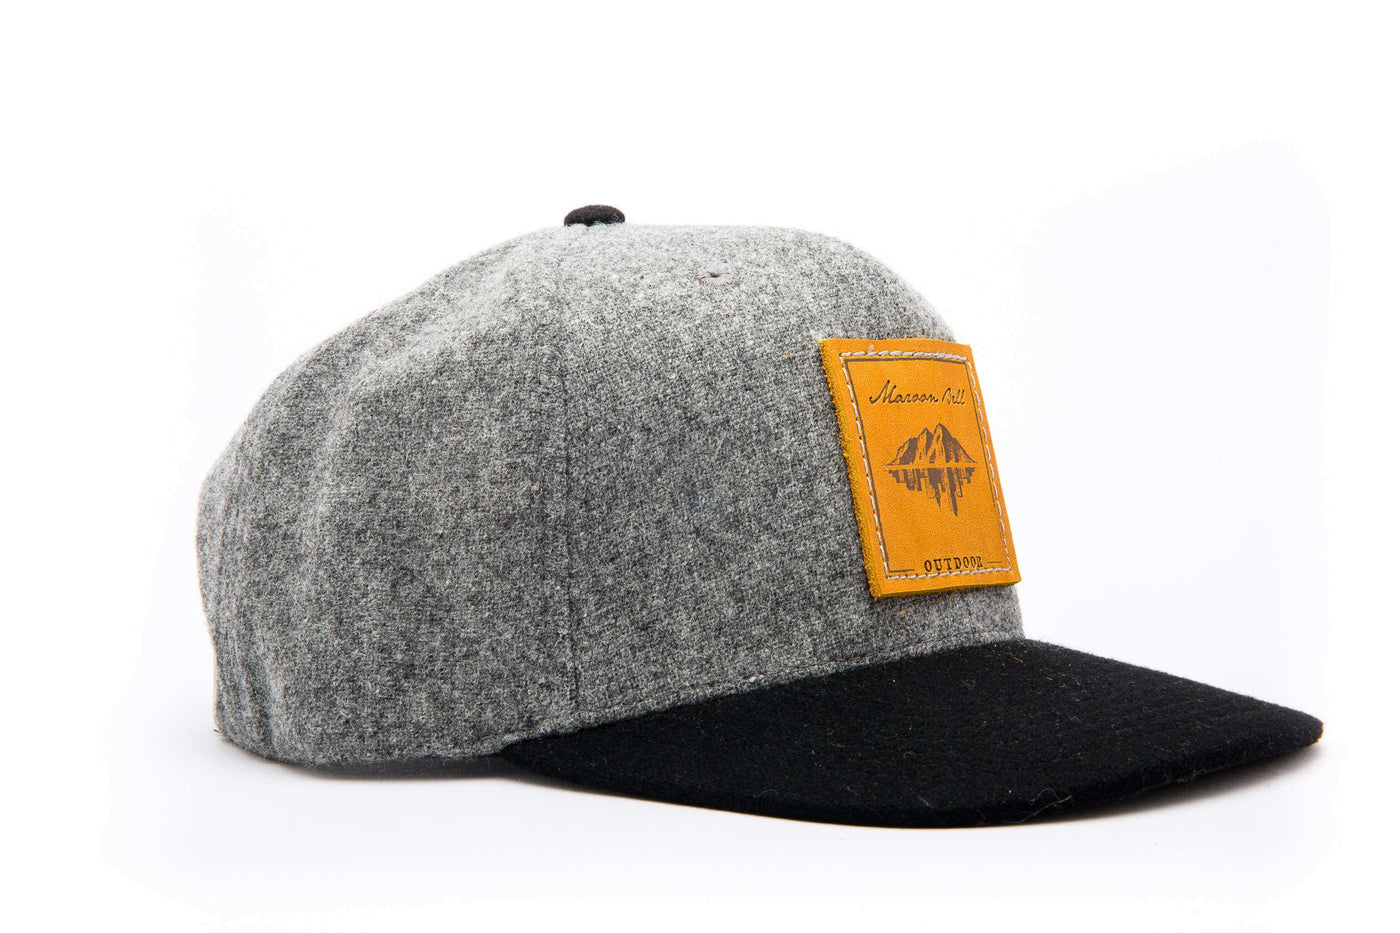 A grey Melton wool baseball hat with a flat black bill and a brown leather patch on the front with the Maroon Bell Outdoor branding.